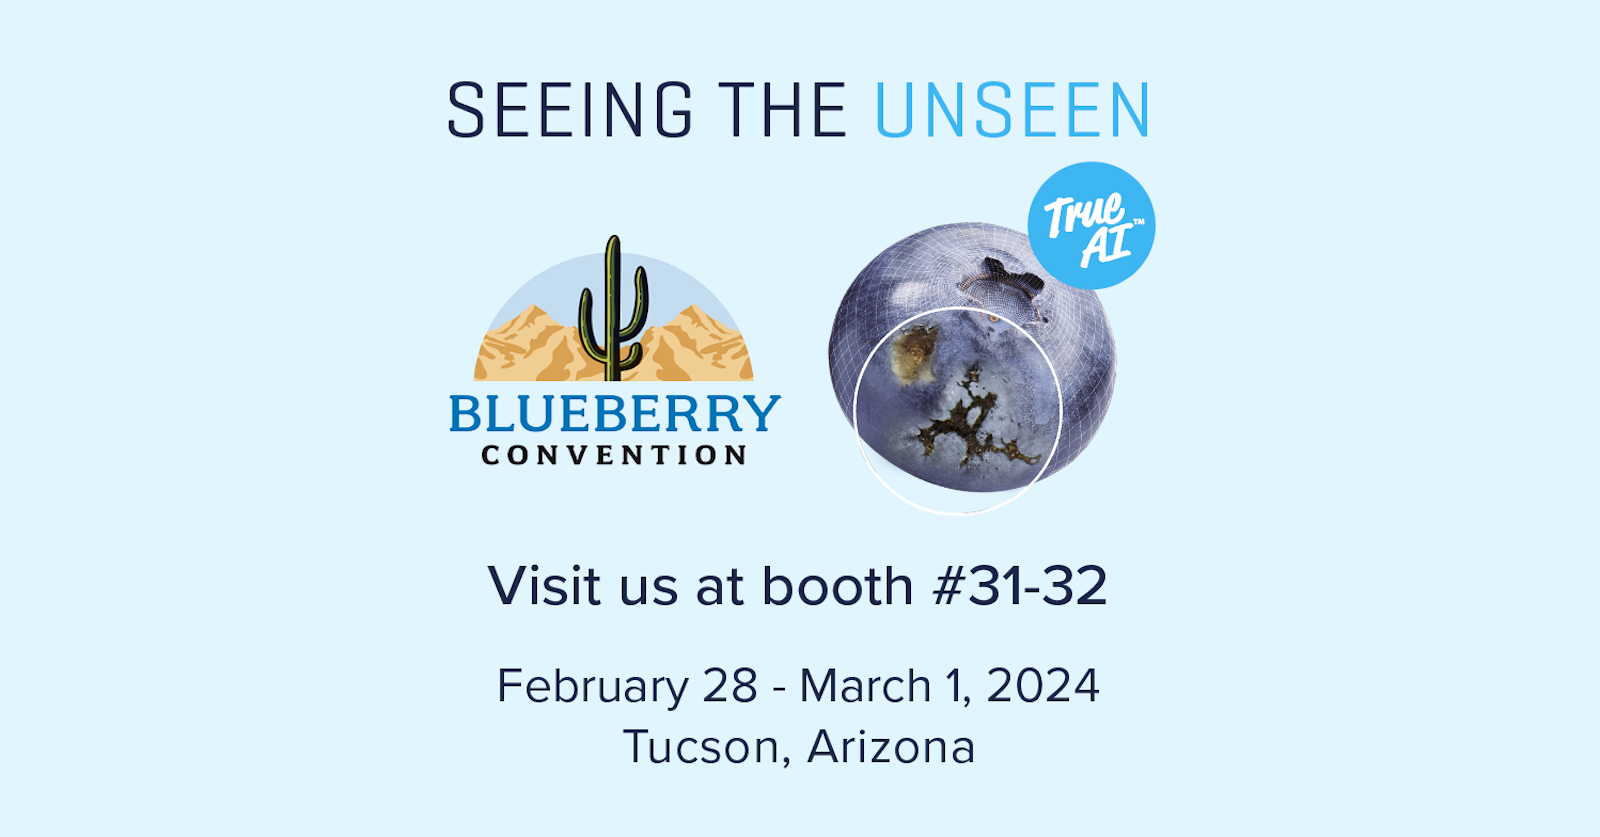 Discover the powerful benefits of AI at Blueberry Convention